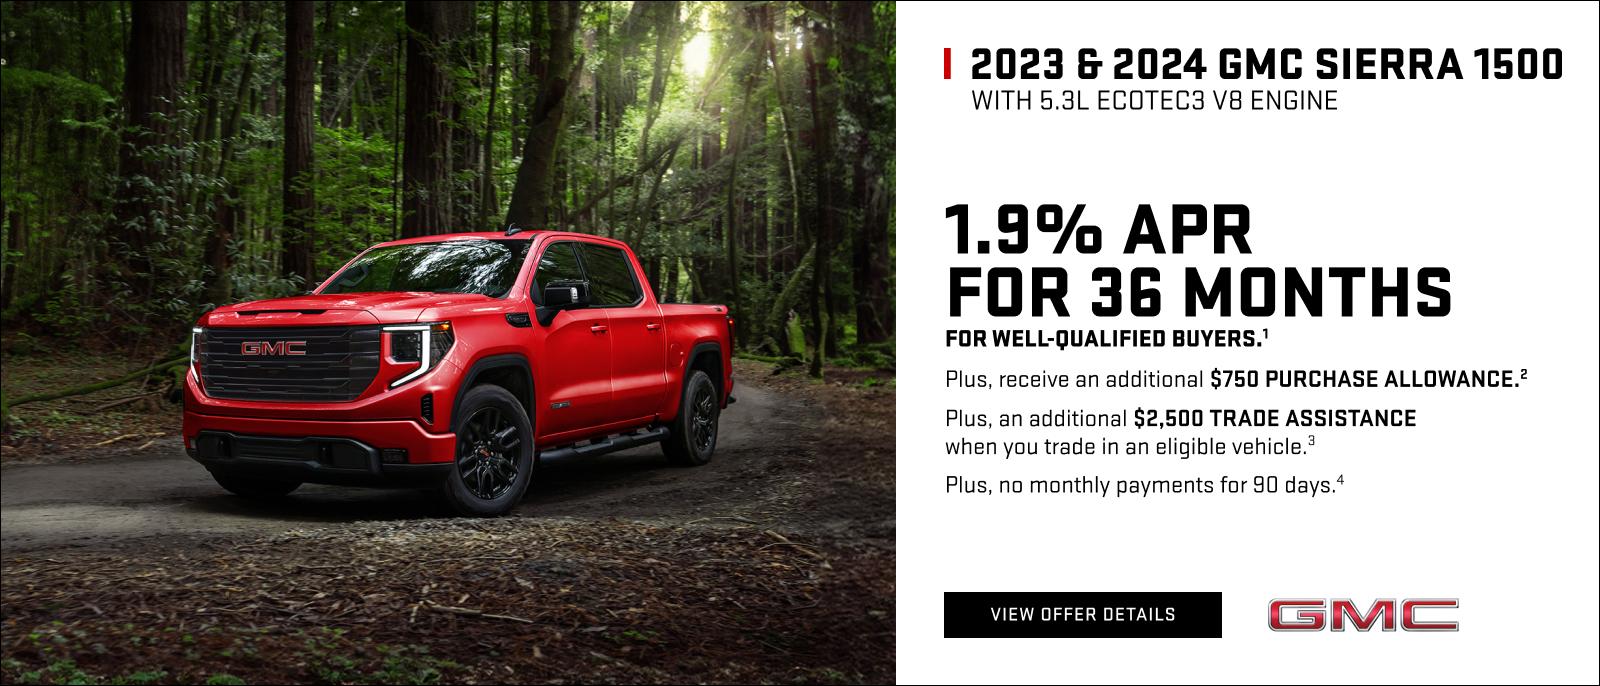 1.9% APR FOR 36 MONTHS for well-qualified buyers.1

Plus, receive an additional $750 PURCHASE ALLOWANCE.2

Plus, an additional $2,500 TRADE ASSISTANCE when you trade in an eligible vehicle.3

Plus, no monthly payments for 90 days. 4